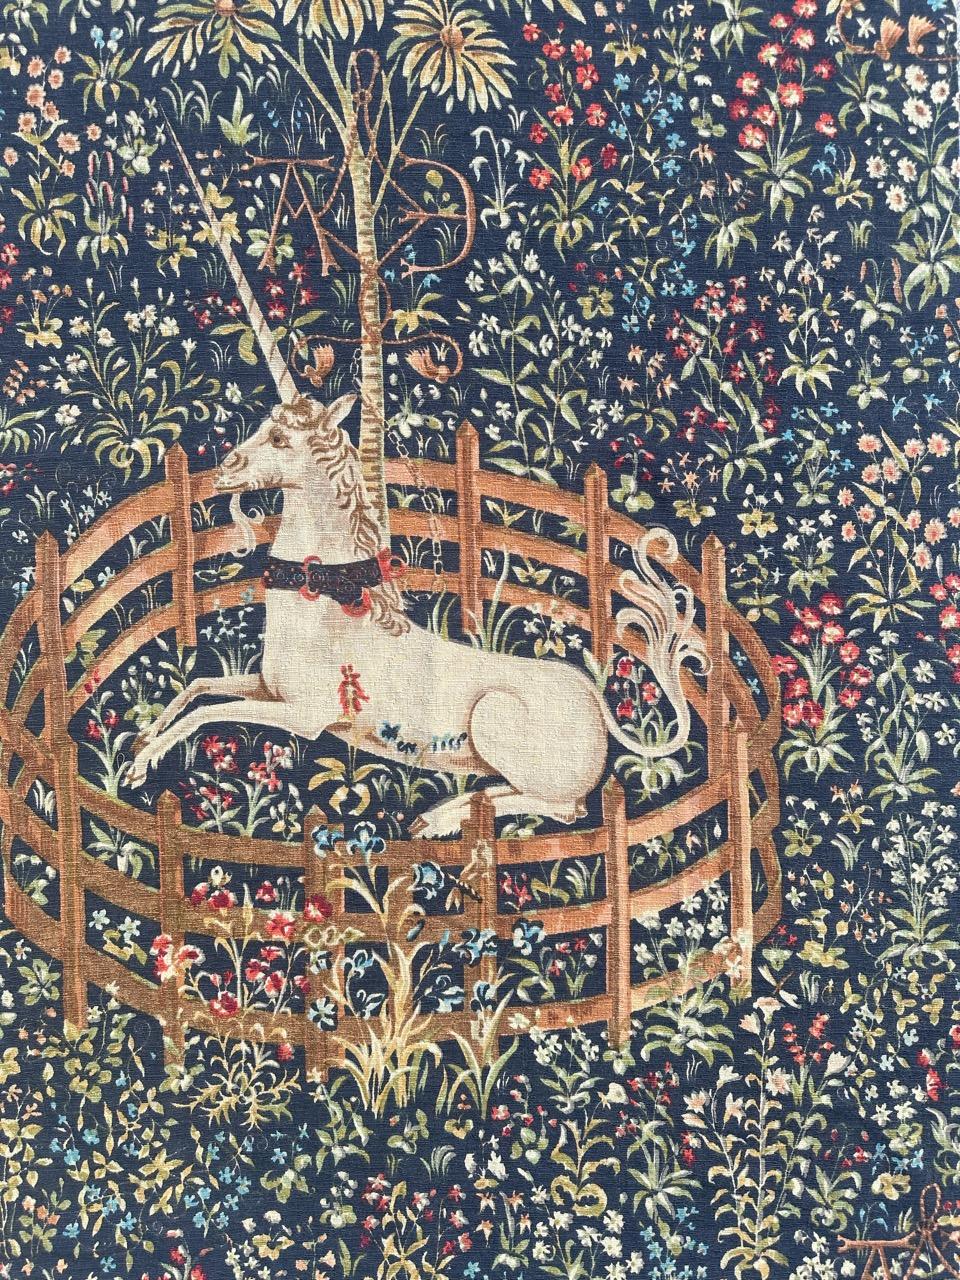 Pretty mid century French hand printed tapestry from Robert Four manufactury in Aubusson with the design of a museum tapestry « unicorn in captivity » in a 
Mille fleurs (thousand flowers) background.

Replica of ancient tapestry printed to the